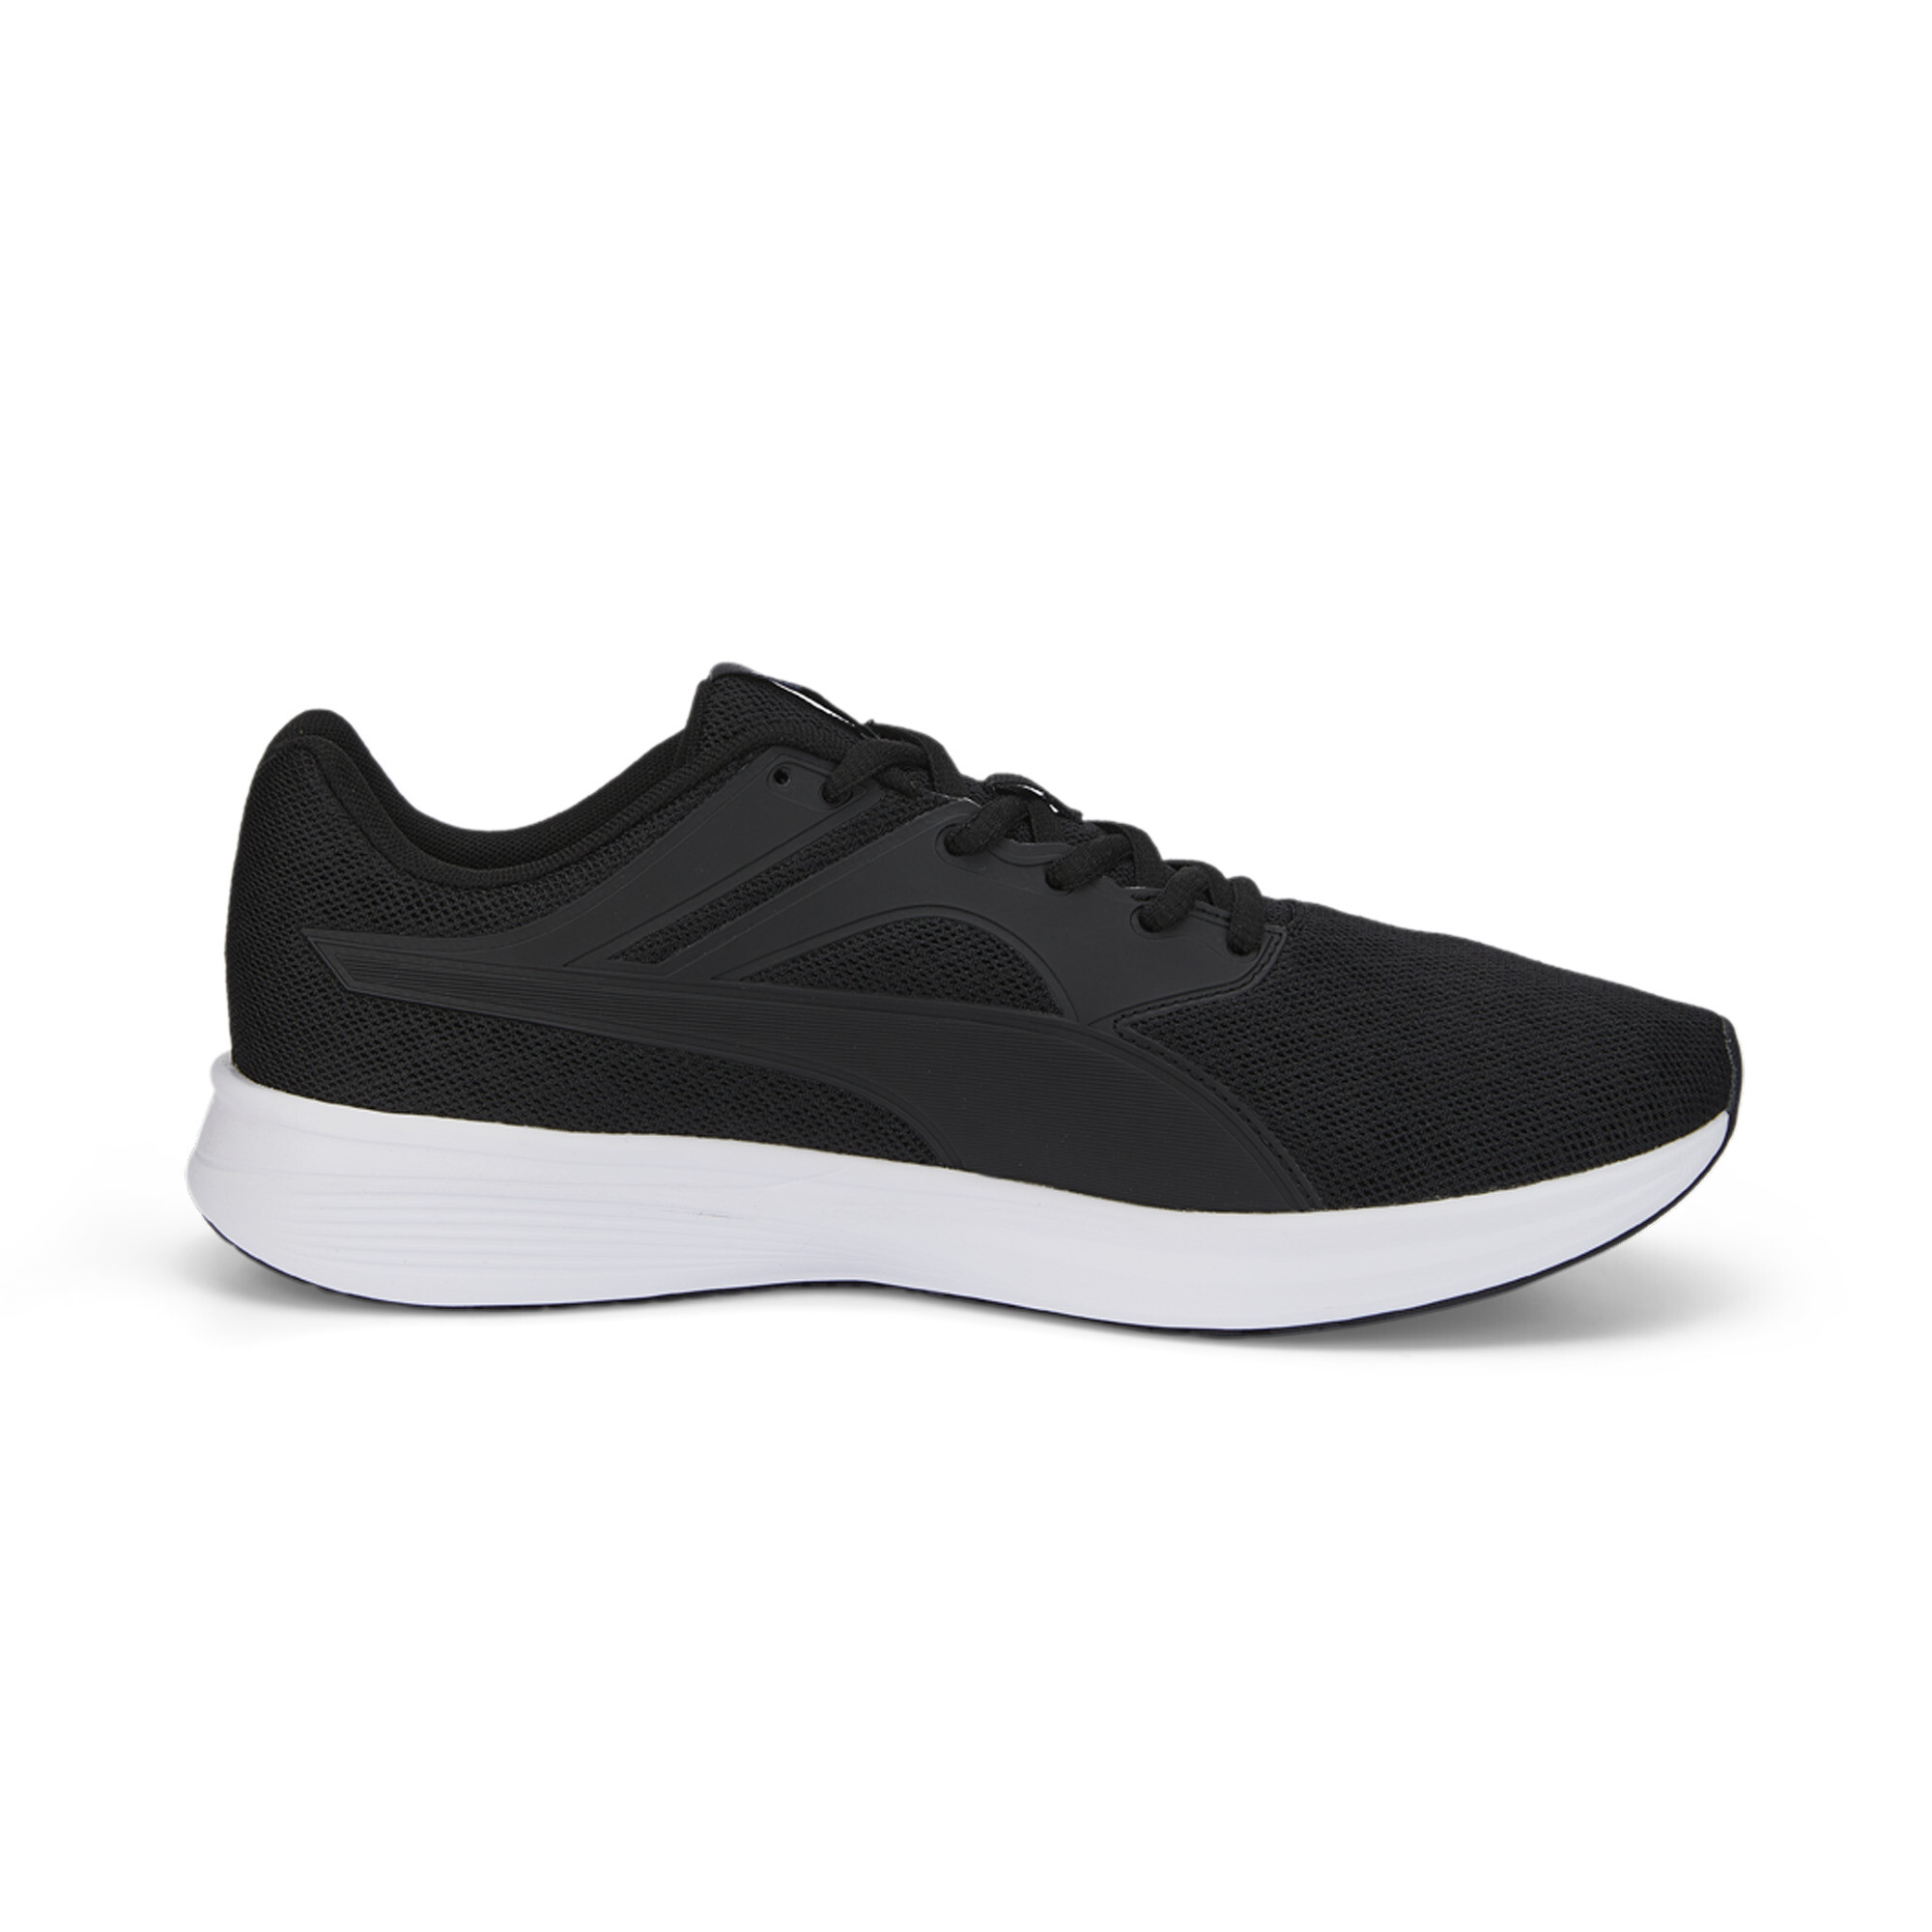 Puma Transport Running Shoes, Black, Size 38, Shoes